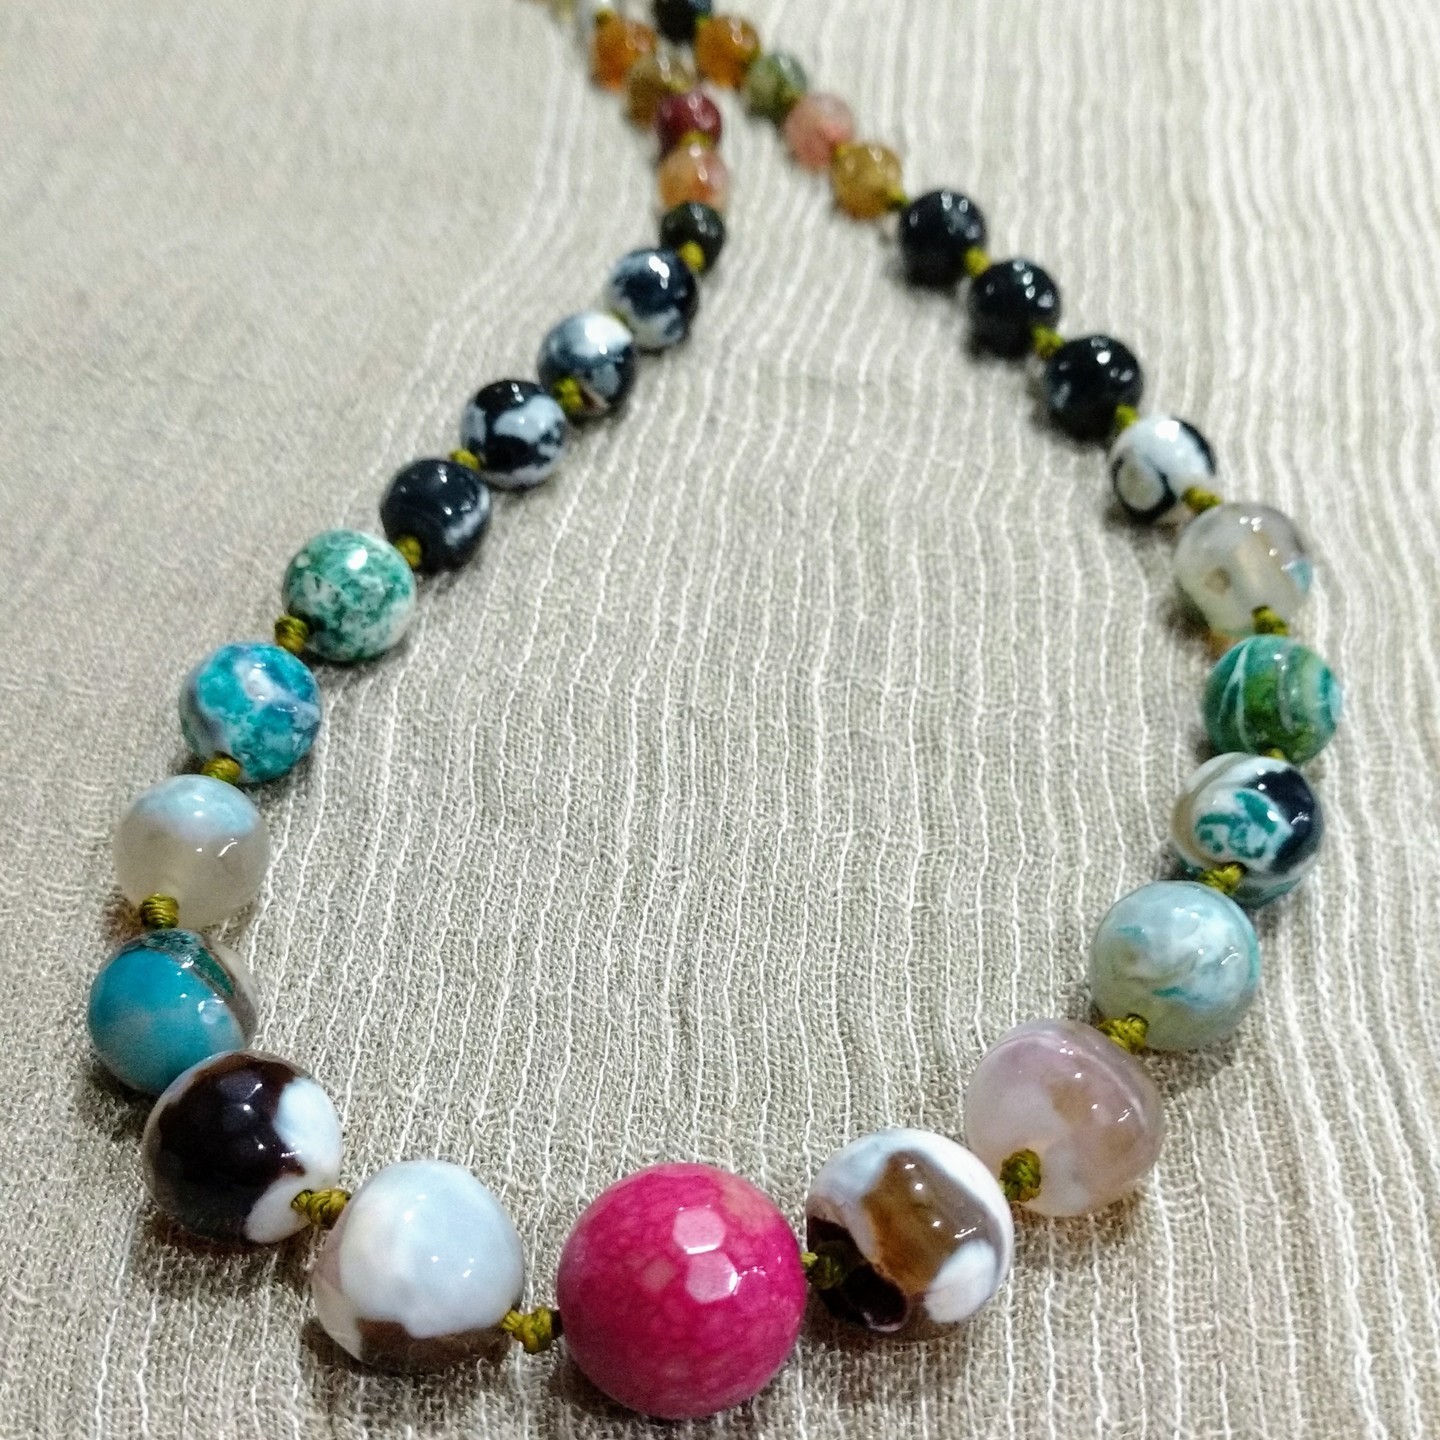 Bead Necklace with Knotted Thread